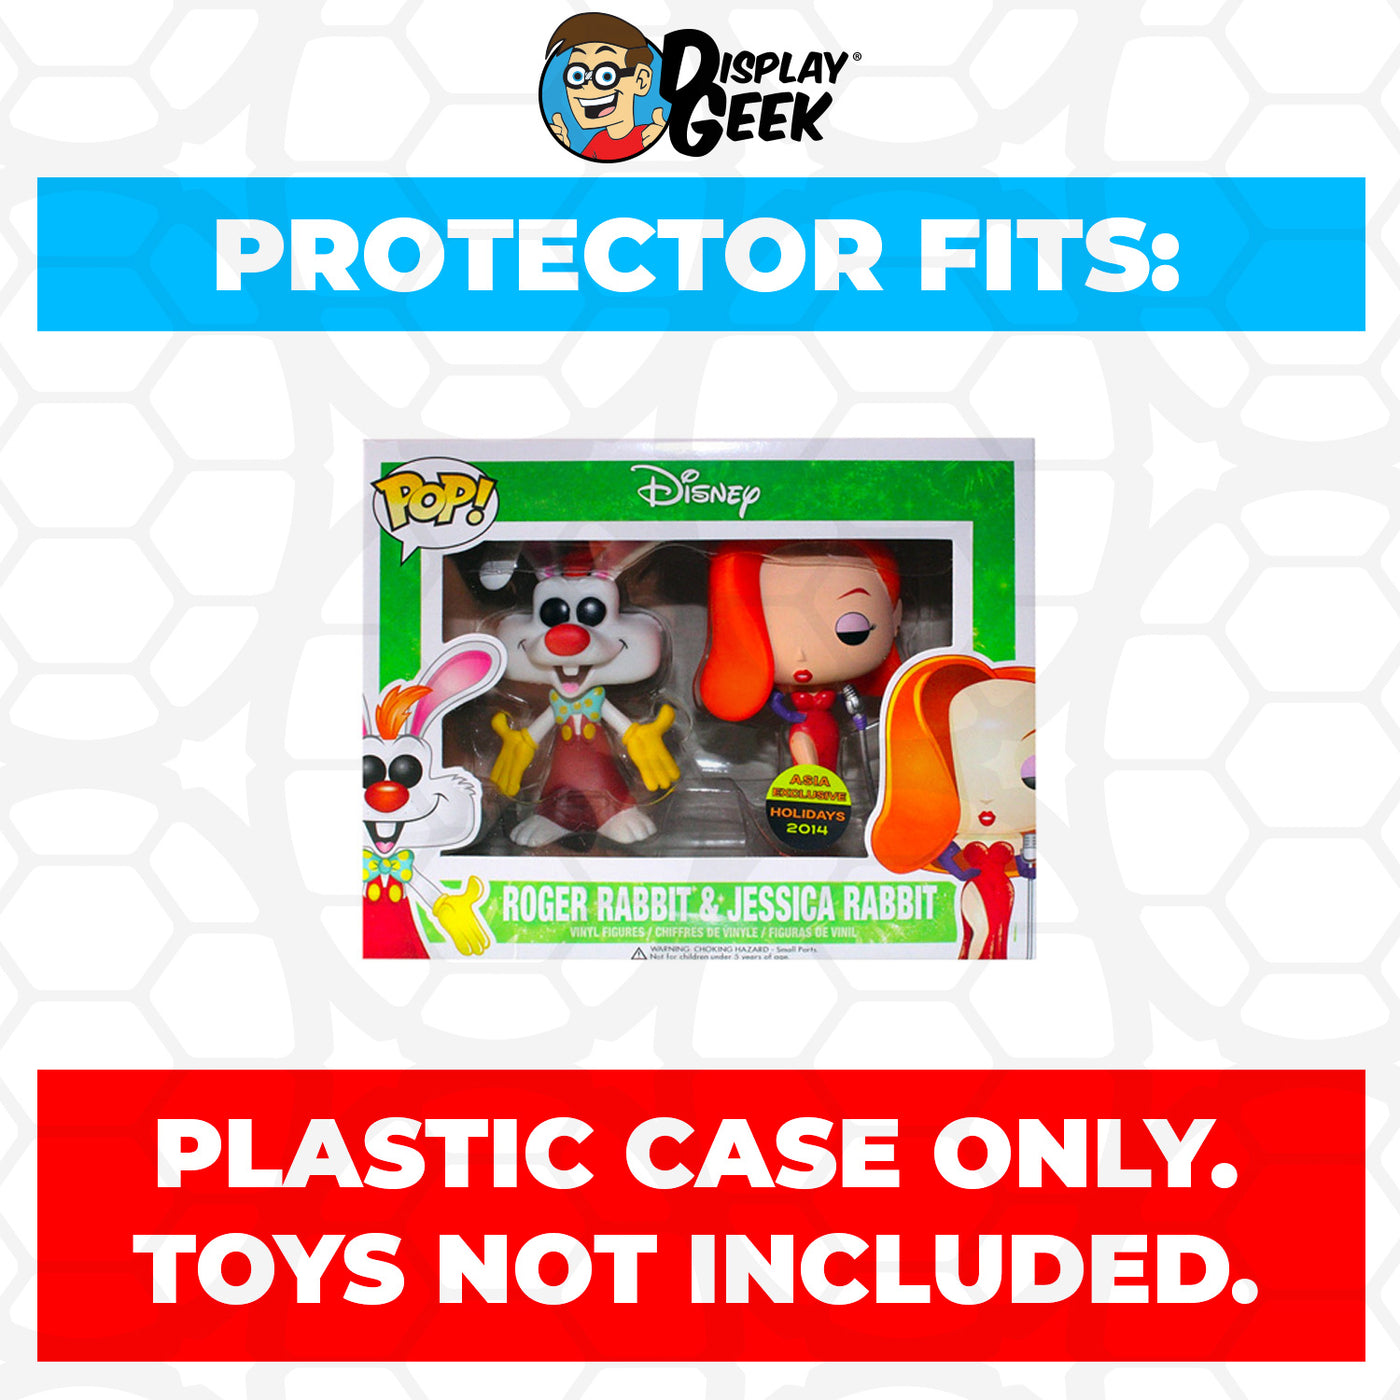 Pop Protector for 2 Pack Roger Rabbit & Jessica Rabbit Funko Pop on The Protector Guide App by Display Geek